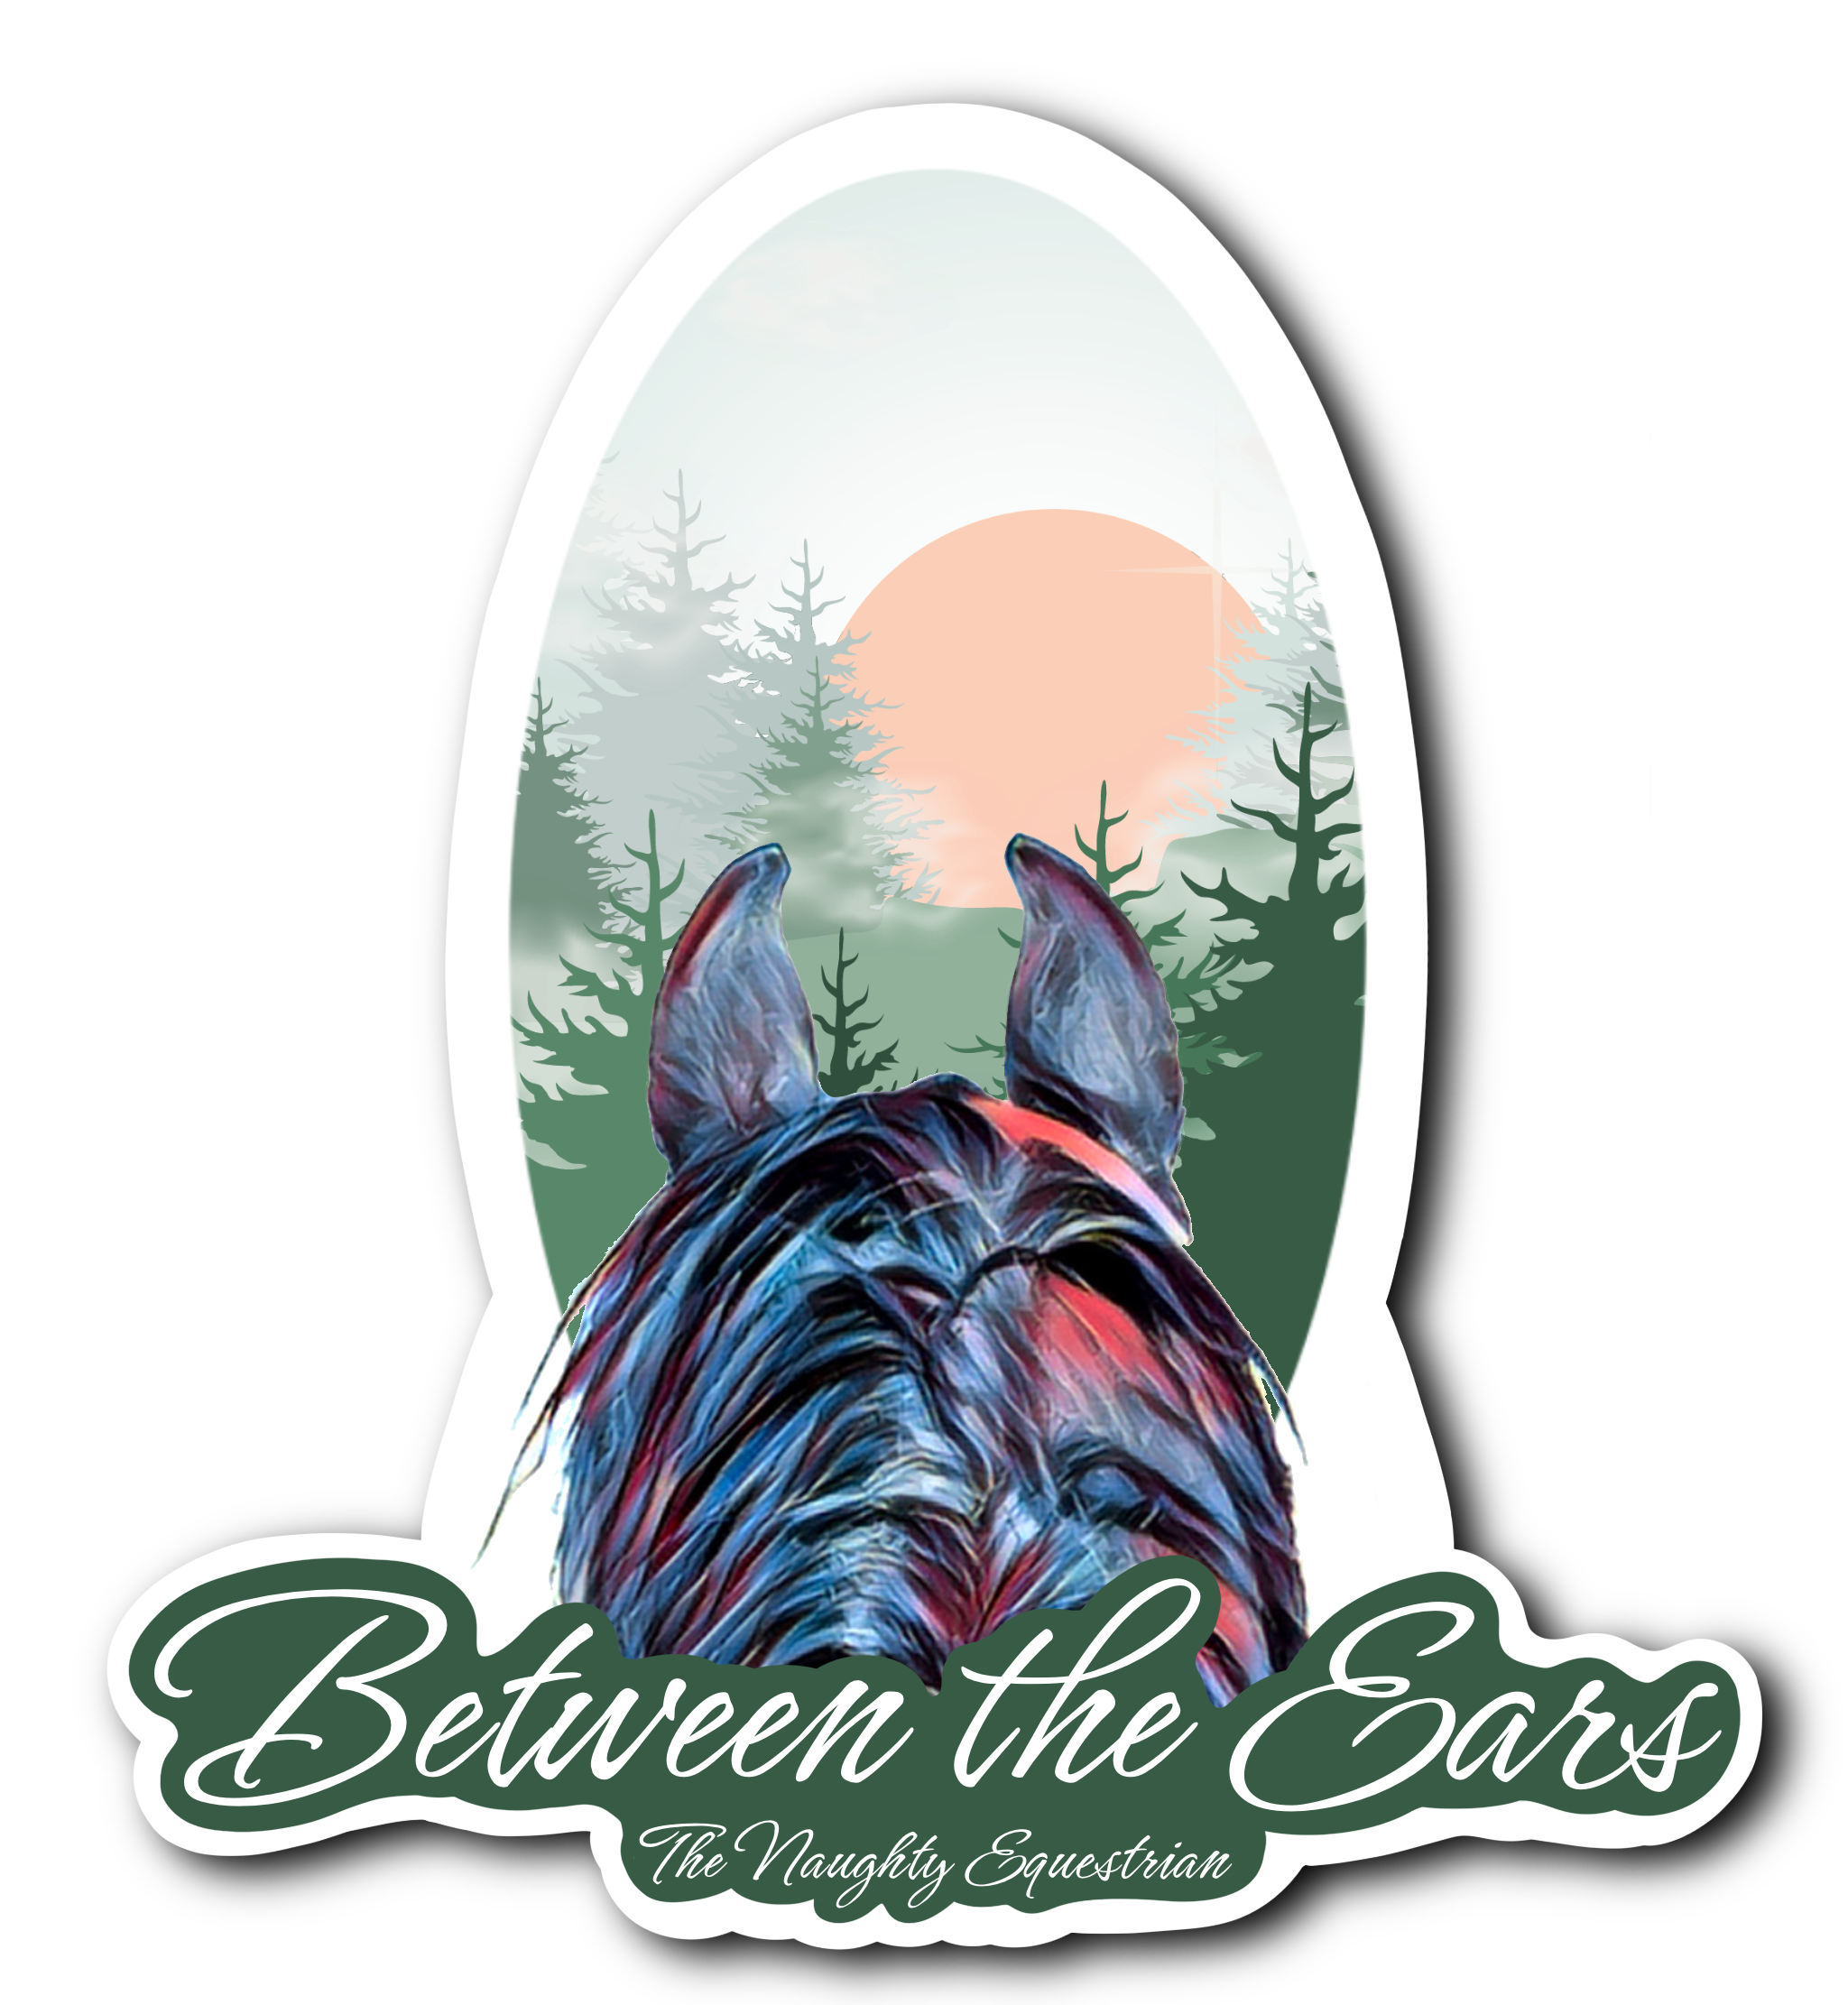 Forest Between the Ears Series Sticker, Vinyl Car Decal